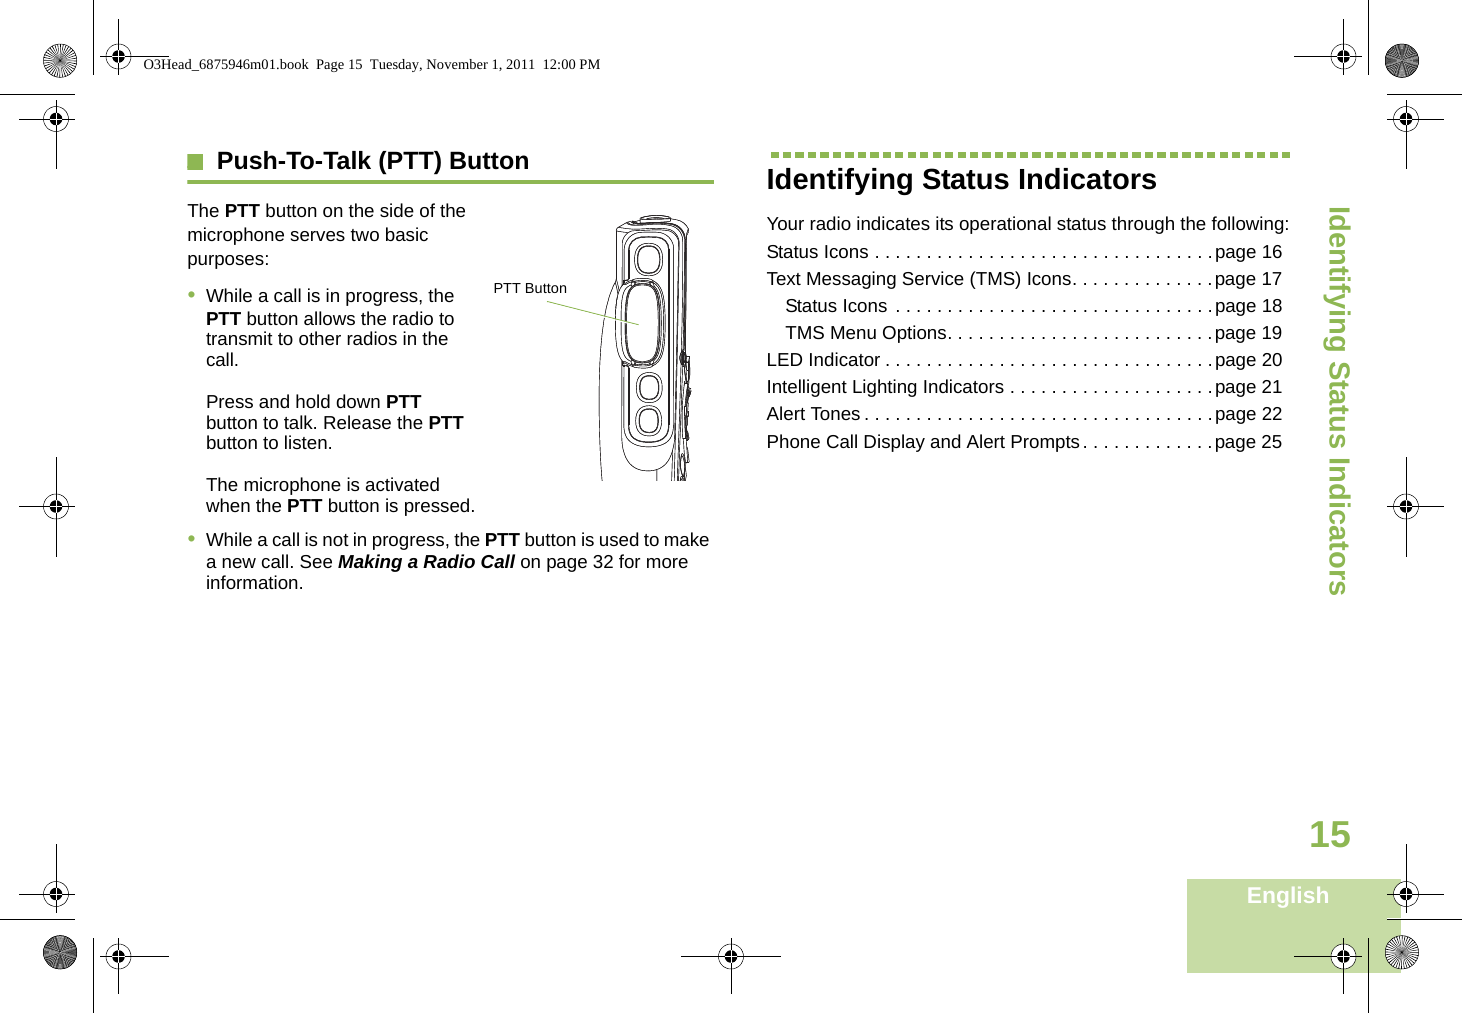 Identifying Status IndicatorsEnglish15Push-To-Talk (PTT) Button    The PTT button on the side of the microphone serves two basic purposes:     •While a call is in progress, the PTT button allows the radio to transmit to other radios in the call.Press and hold down PTT button to talk. Release the PTT button to listen.The microphone is activated when the PTT button is pressed.•While a call is not in progress, the PTT button is used to make a new call. See Making a Radio Call on page 32 for more information.Identifying Status IndicatorsYour radio indicates its operational status through the following:Status Icons . . . . . . . . . . . . . . . . . . . . . . . . . . . . . . . . .page 16Text Messaging Service (TMS) Icons. . . . . . . . . . . . . .page 17Status Icons . . . . . . . . . . . . . . . . . . . . . . . . . . . . . . .page 18TMS Menu Options. . . . . . . . . . . . . . . . . . . . . . . . . .page 19LED Indicator . . . . . . . . . . . . . . . . . . . . . . . . . . . . . . . .page 20Intelligent Lighting Indicators . . . . . . . . . . . . . . . . . . . .page 21Alert Tones . . . . . . . . . . . . . . . . . . . . . . . . . . . . . . . . . .page 22Phone Call Display and Alert Prompts . . . . . . . . . . . . .page 25 PTT ButtonO3Head_6875946m01.book  Page 15  Tuesday, November 1, 2011  12:00 PM